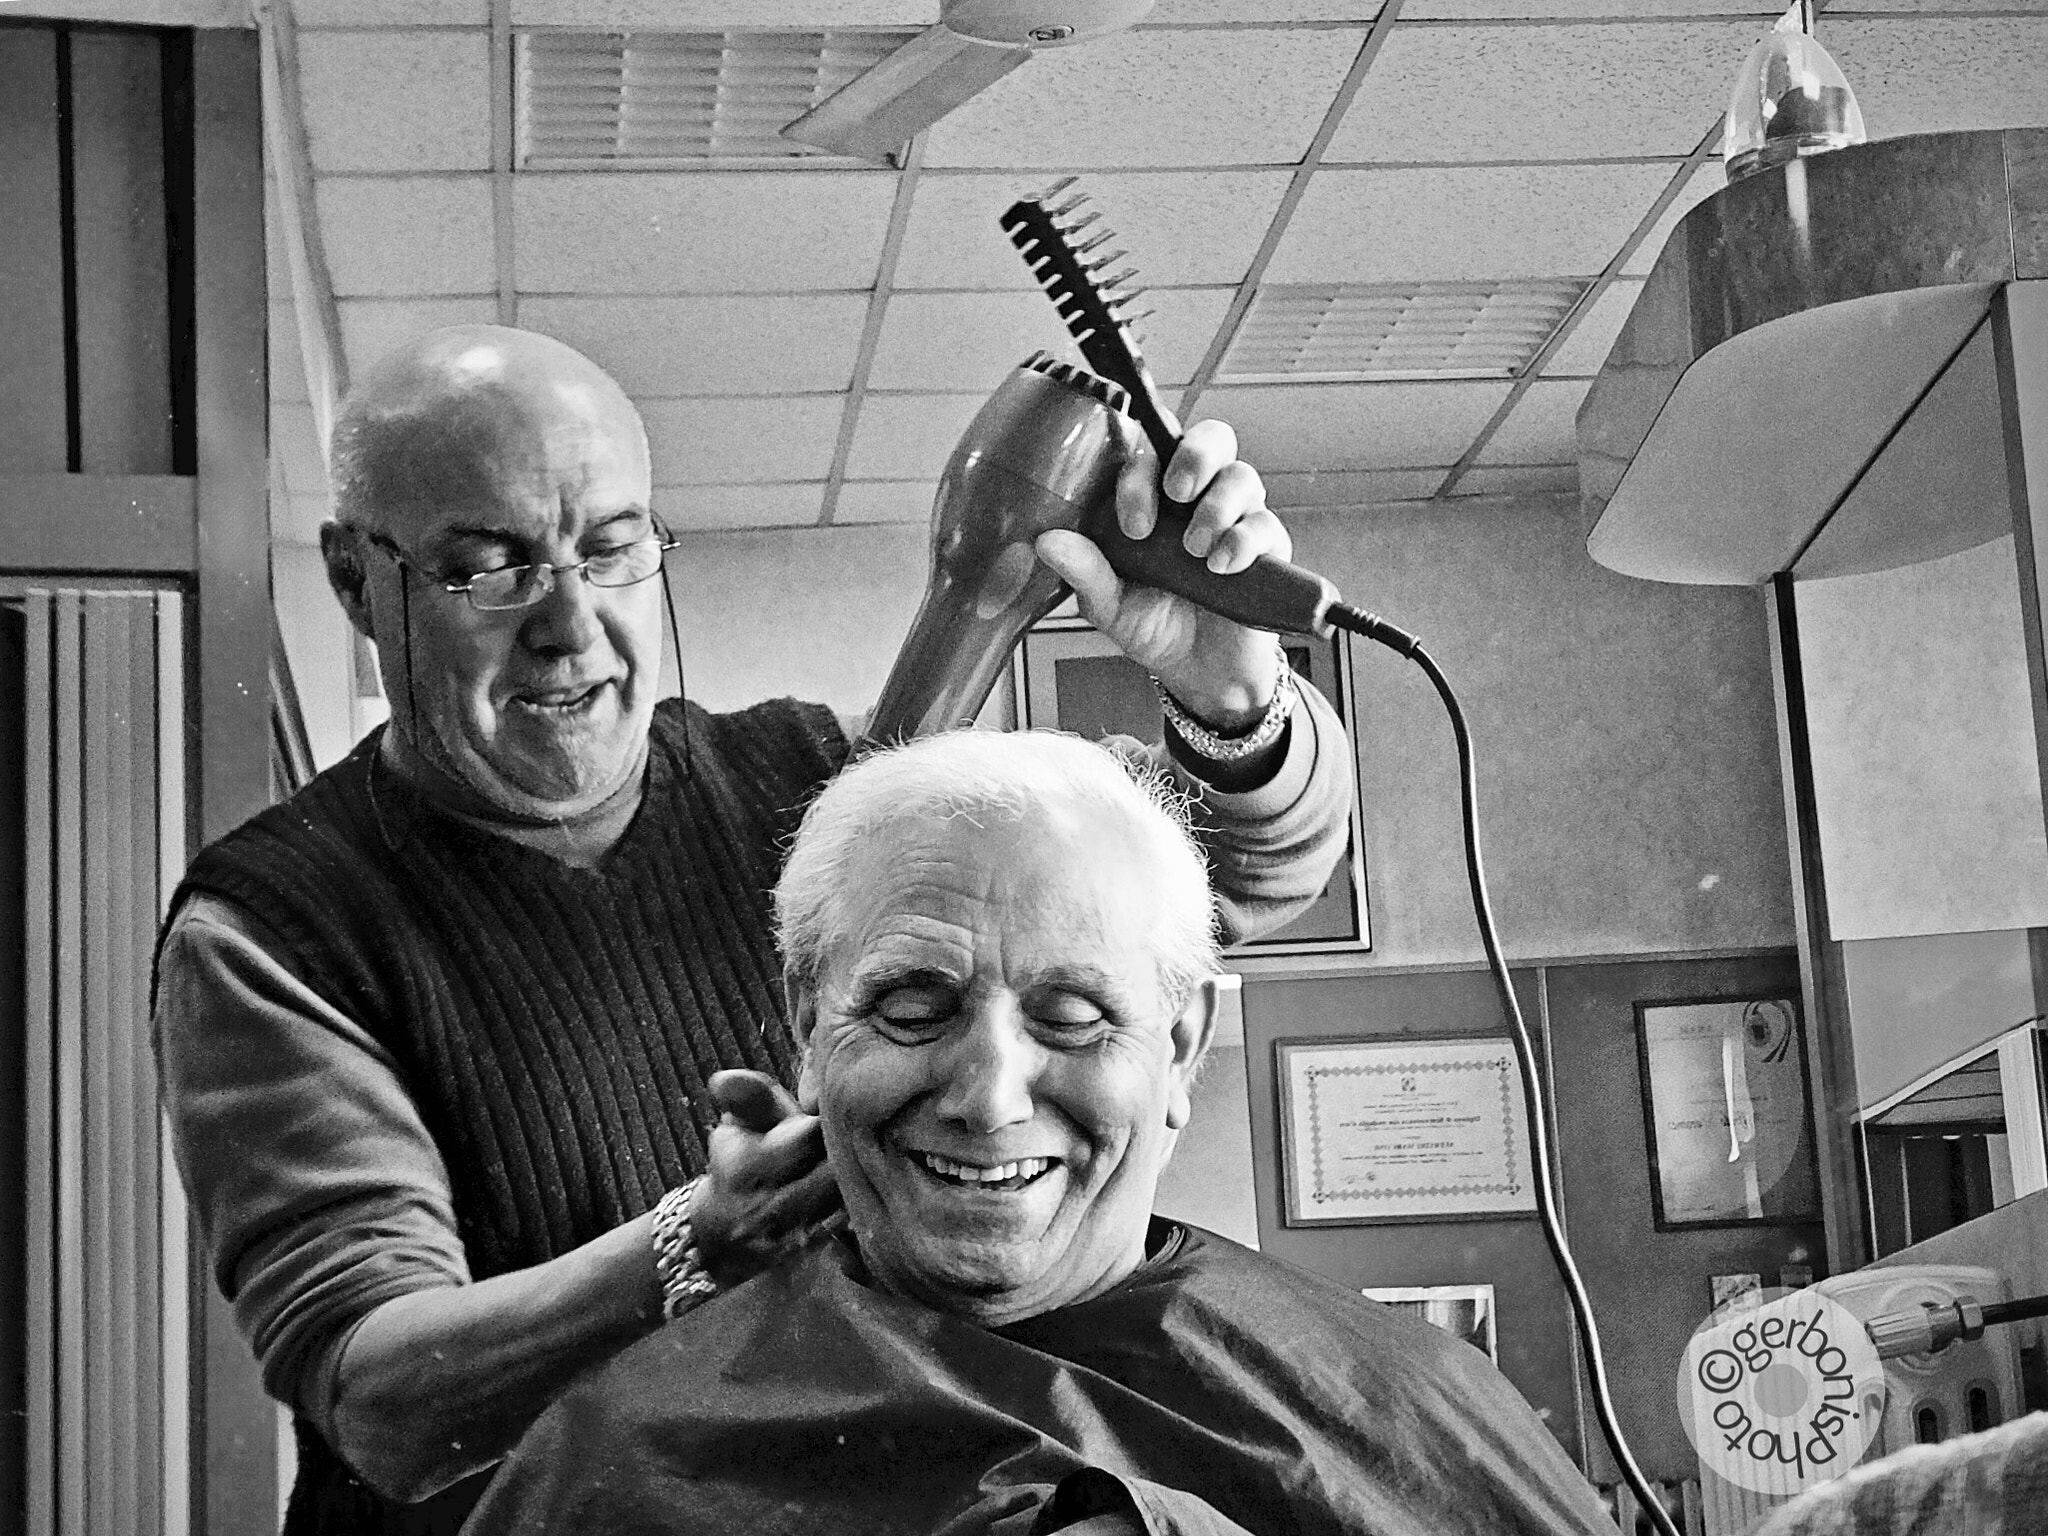 Fujifilm FinePix F900EXR sample photo. Satisfying haircut from the barber photography